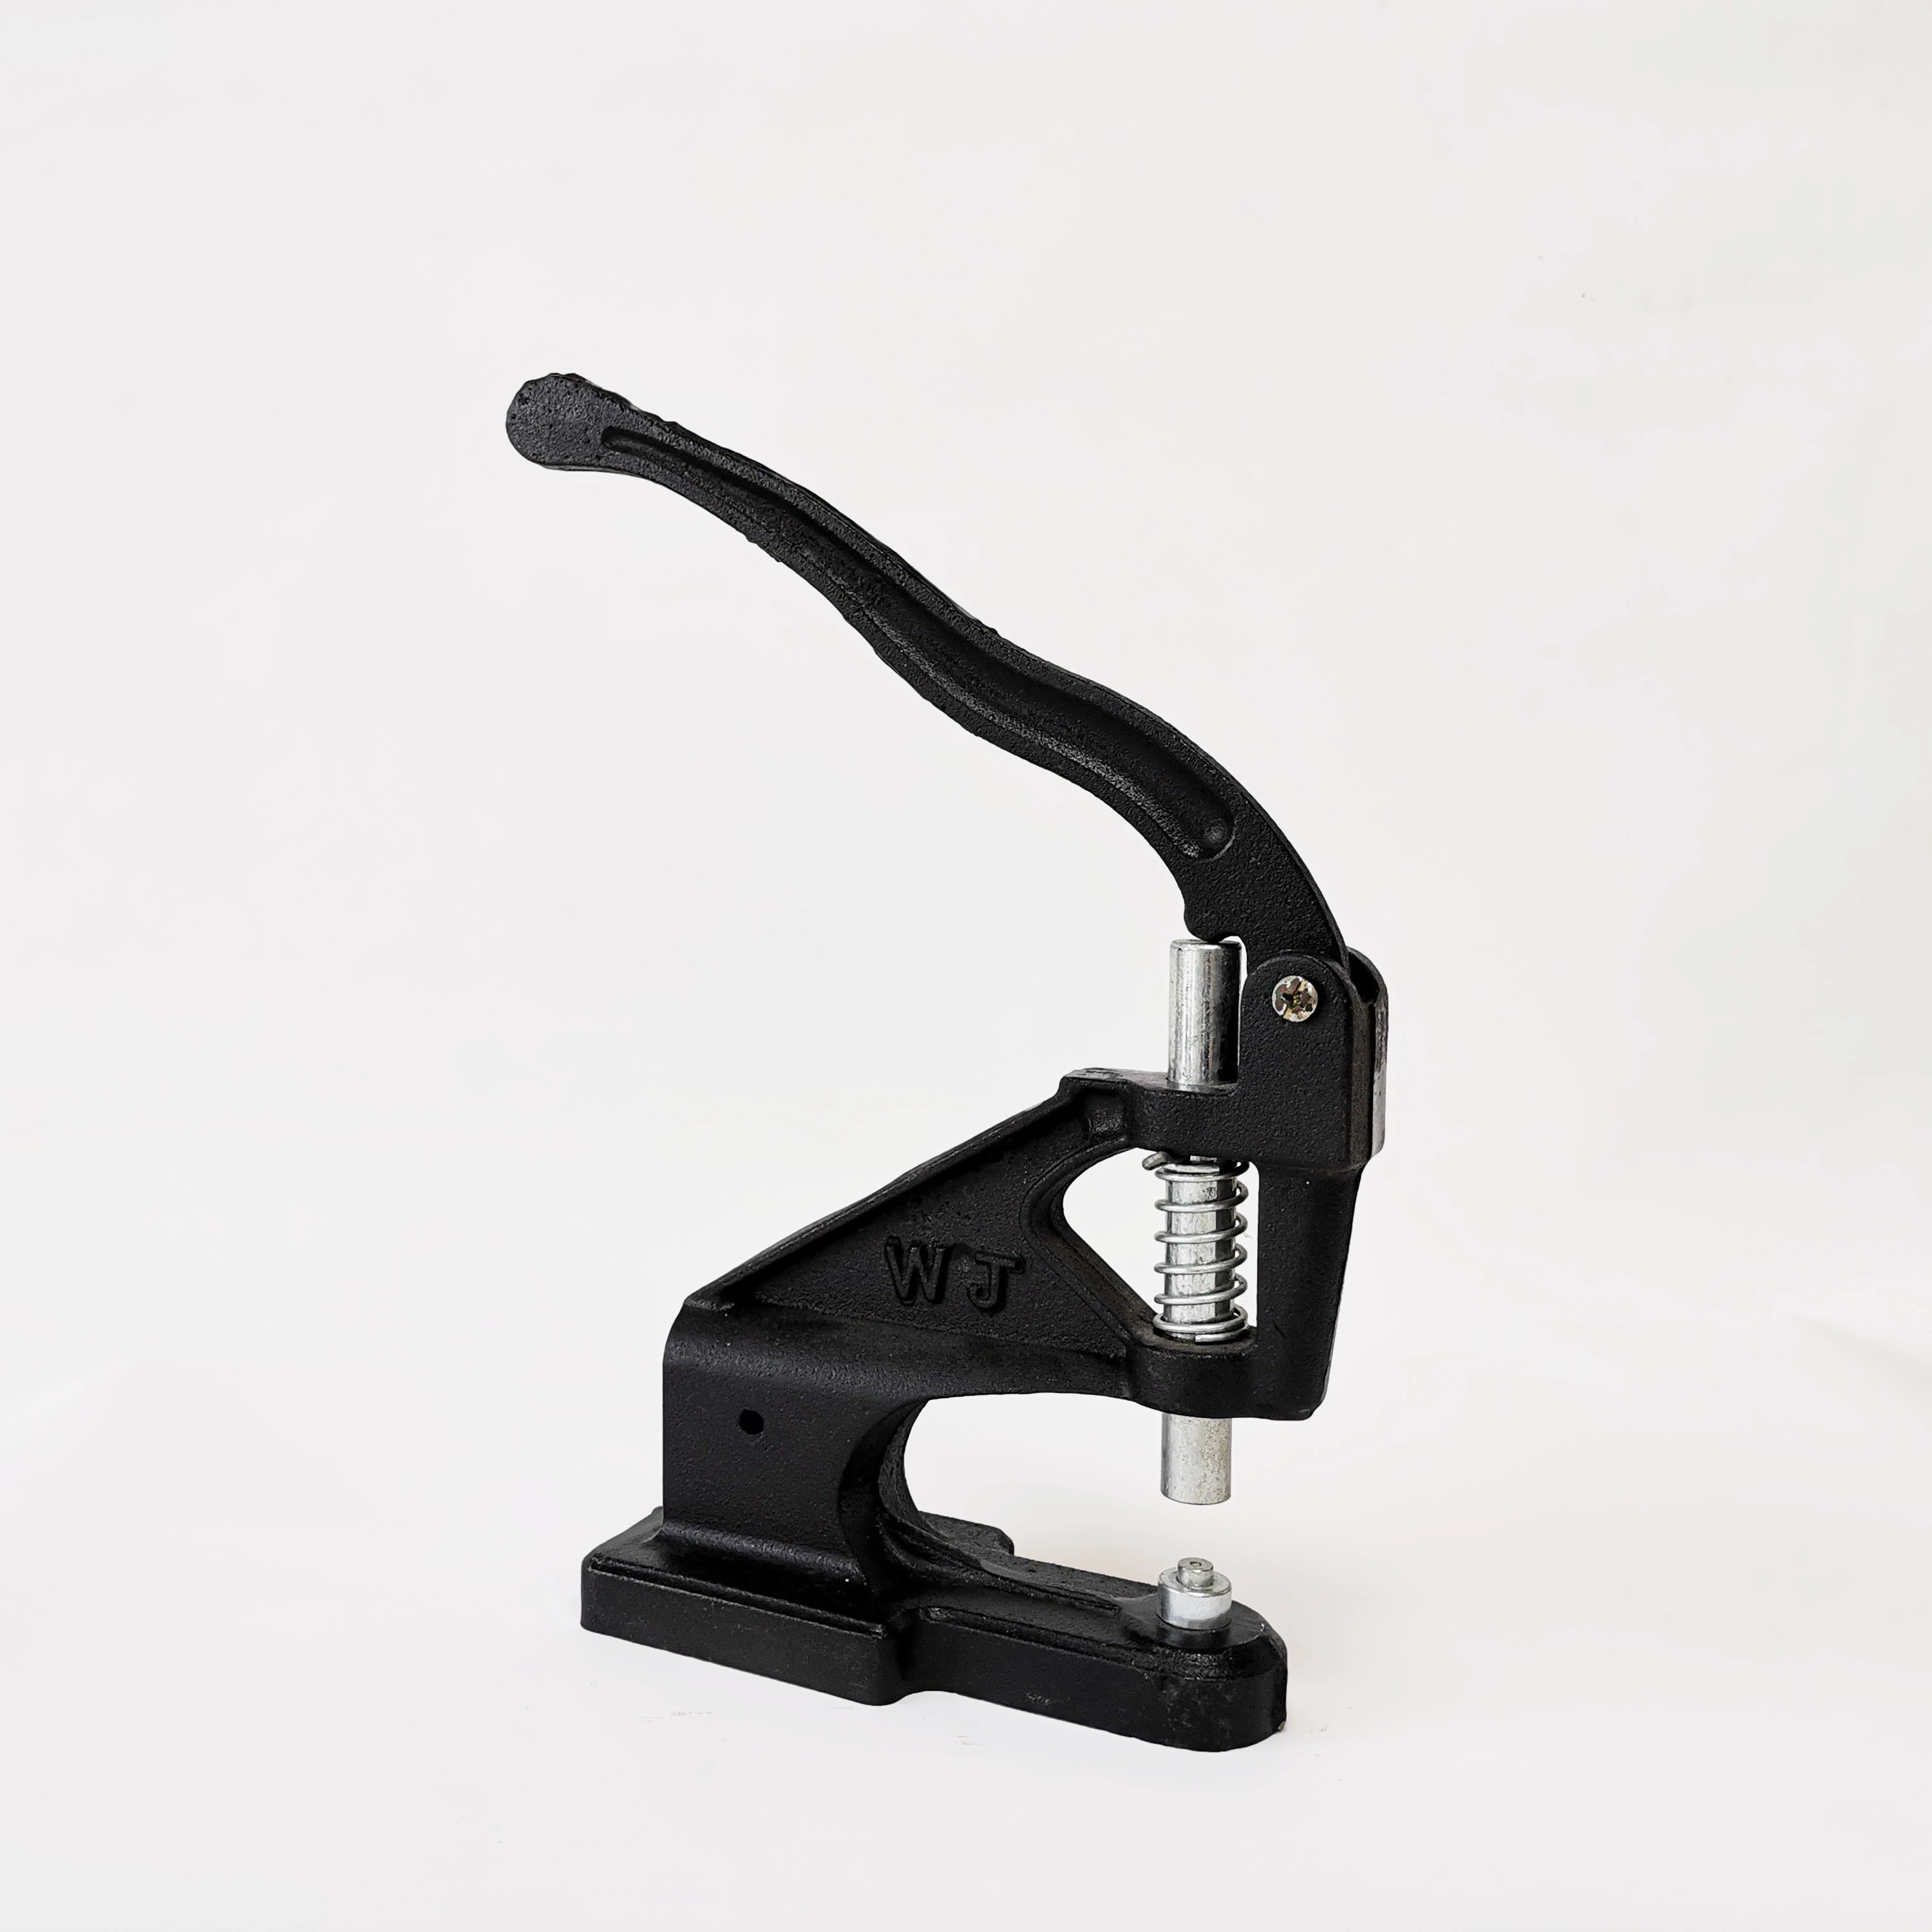 Price list of small grommet machines for indoor use